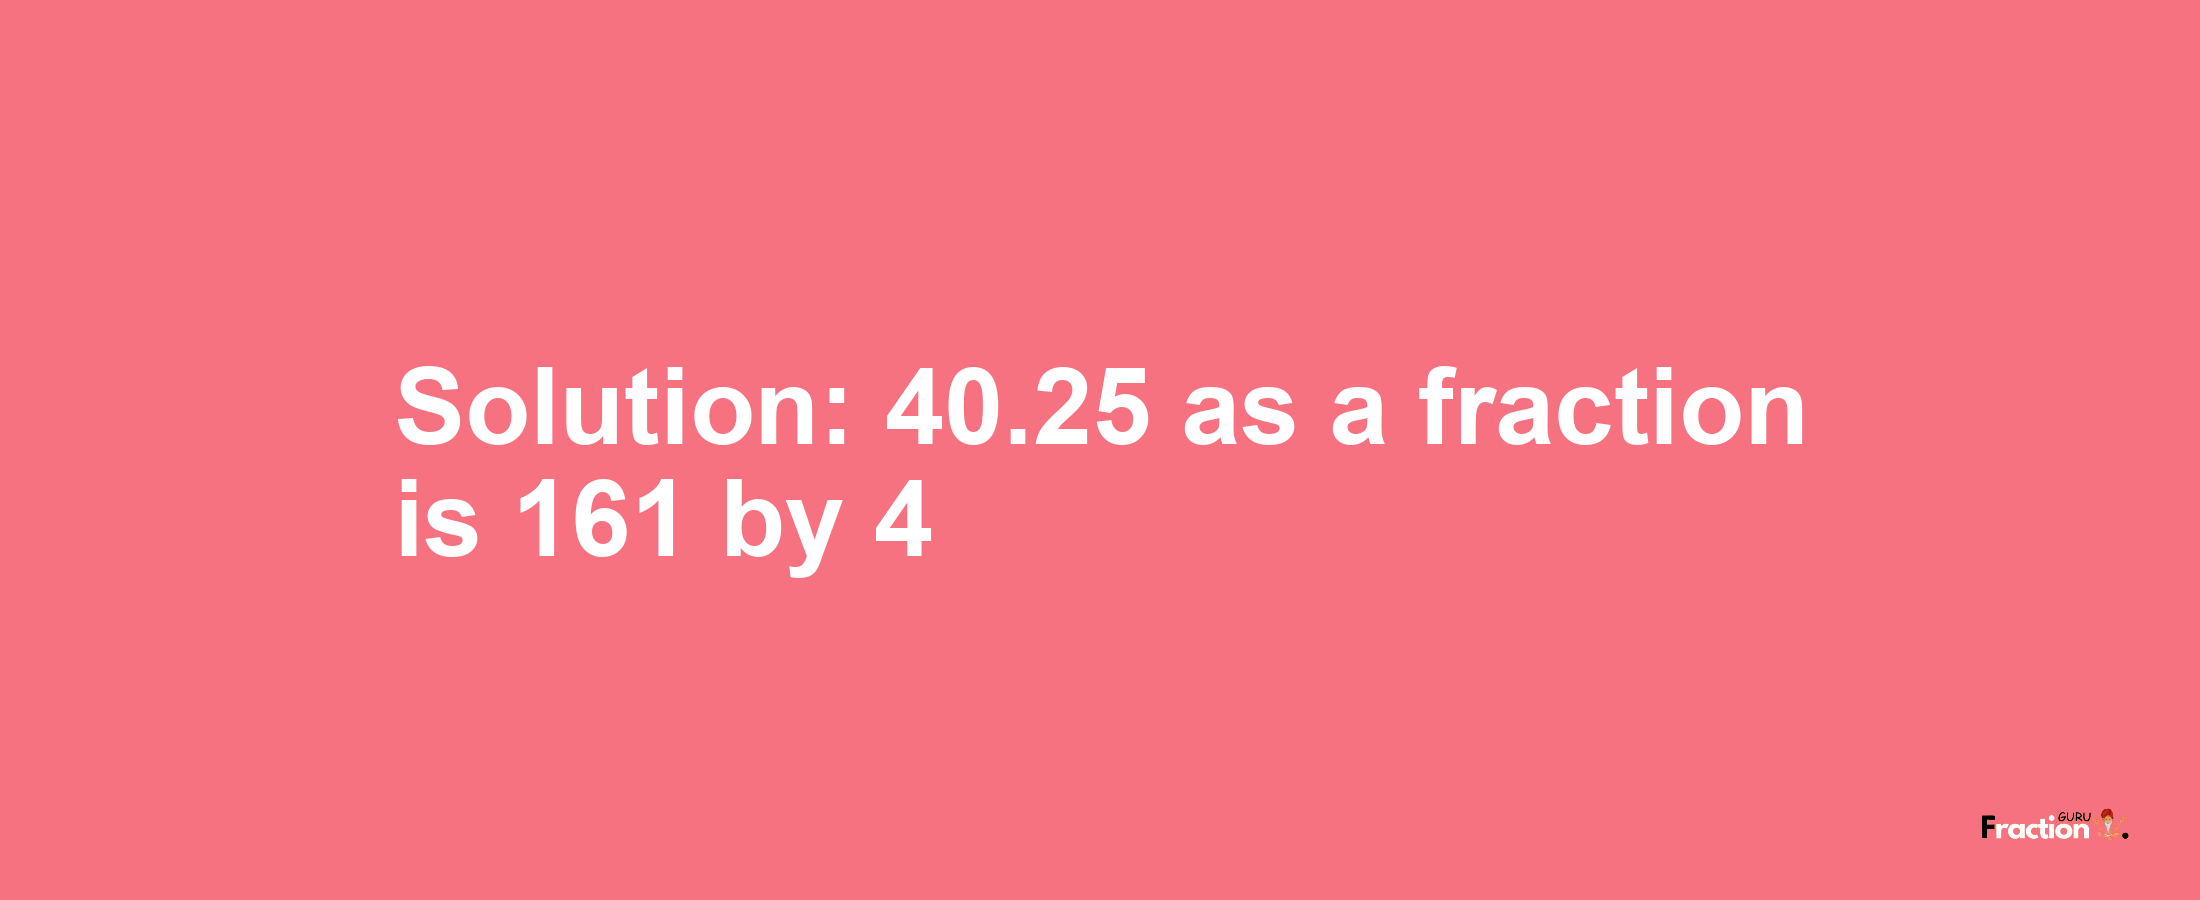 Solution:40.25 as a fraction is 161/4